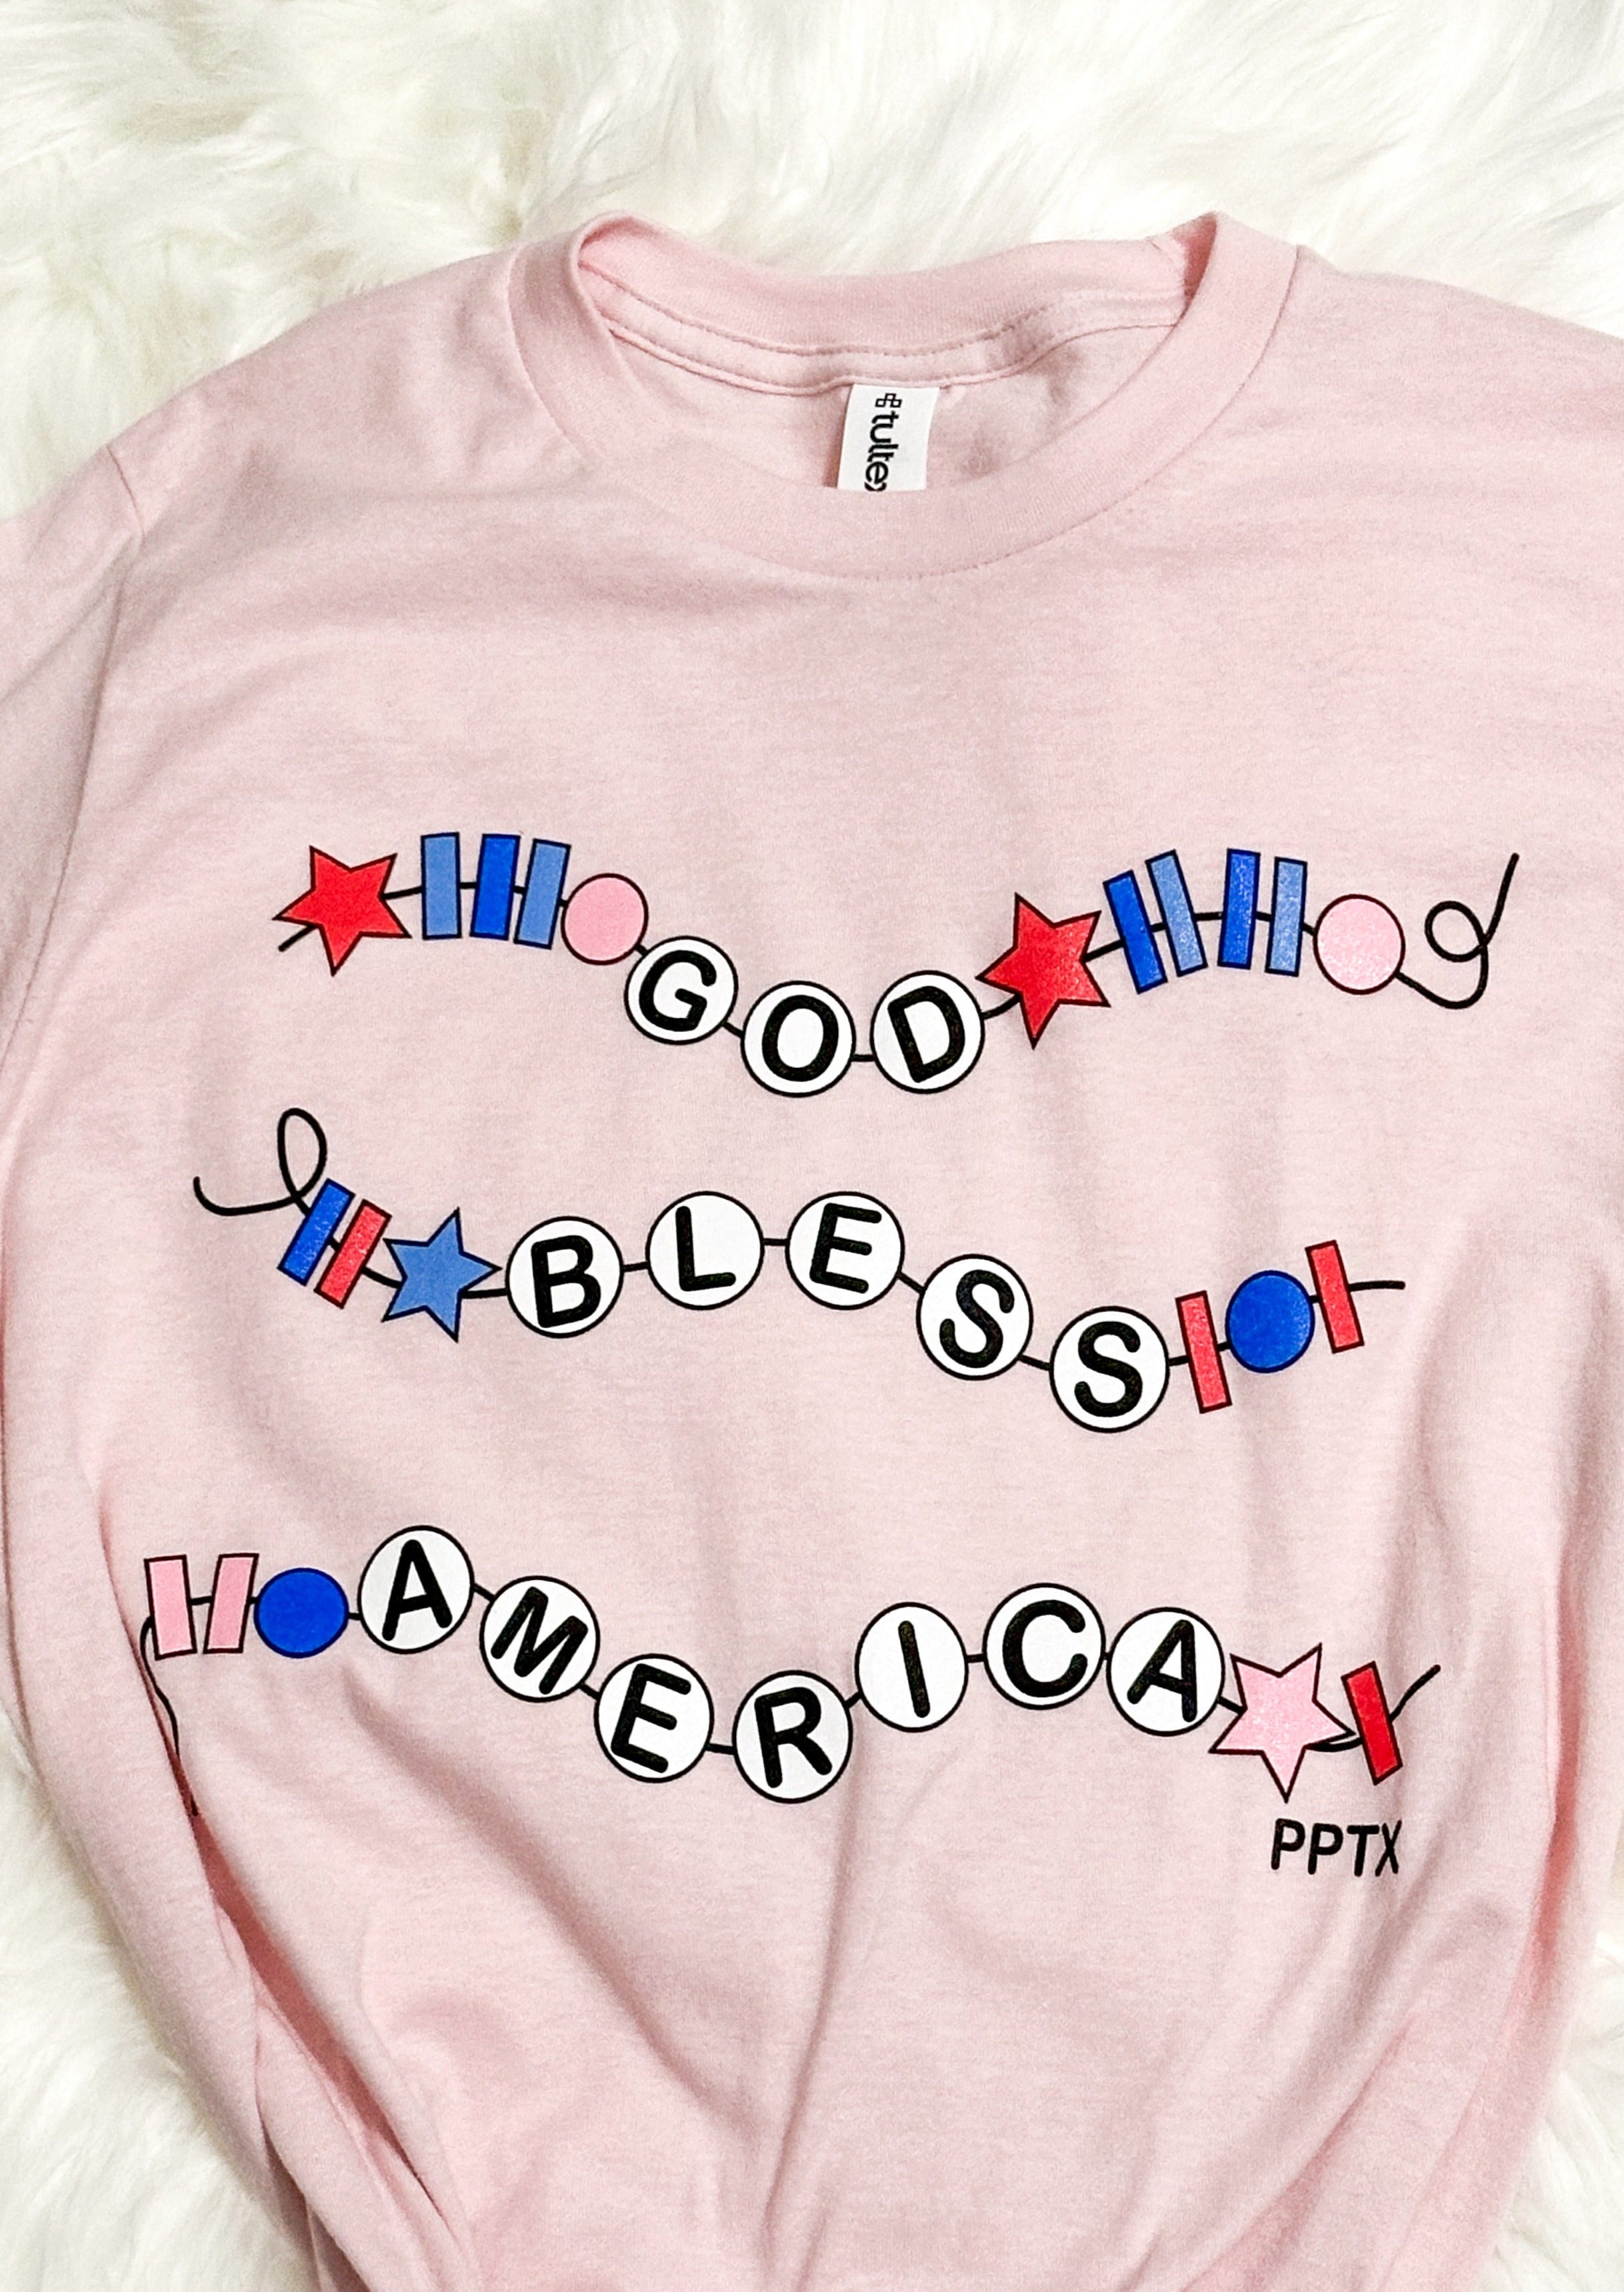 pink tee shirt with god bless america in a friendship bracelet style across the front